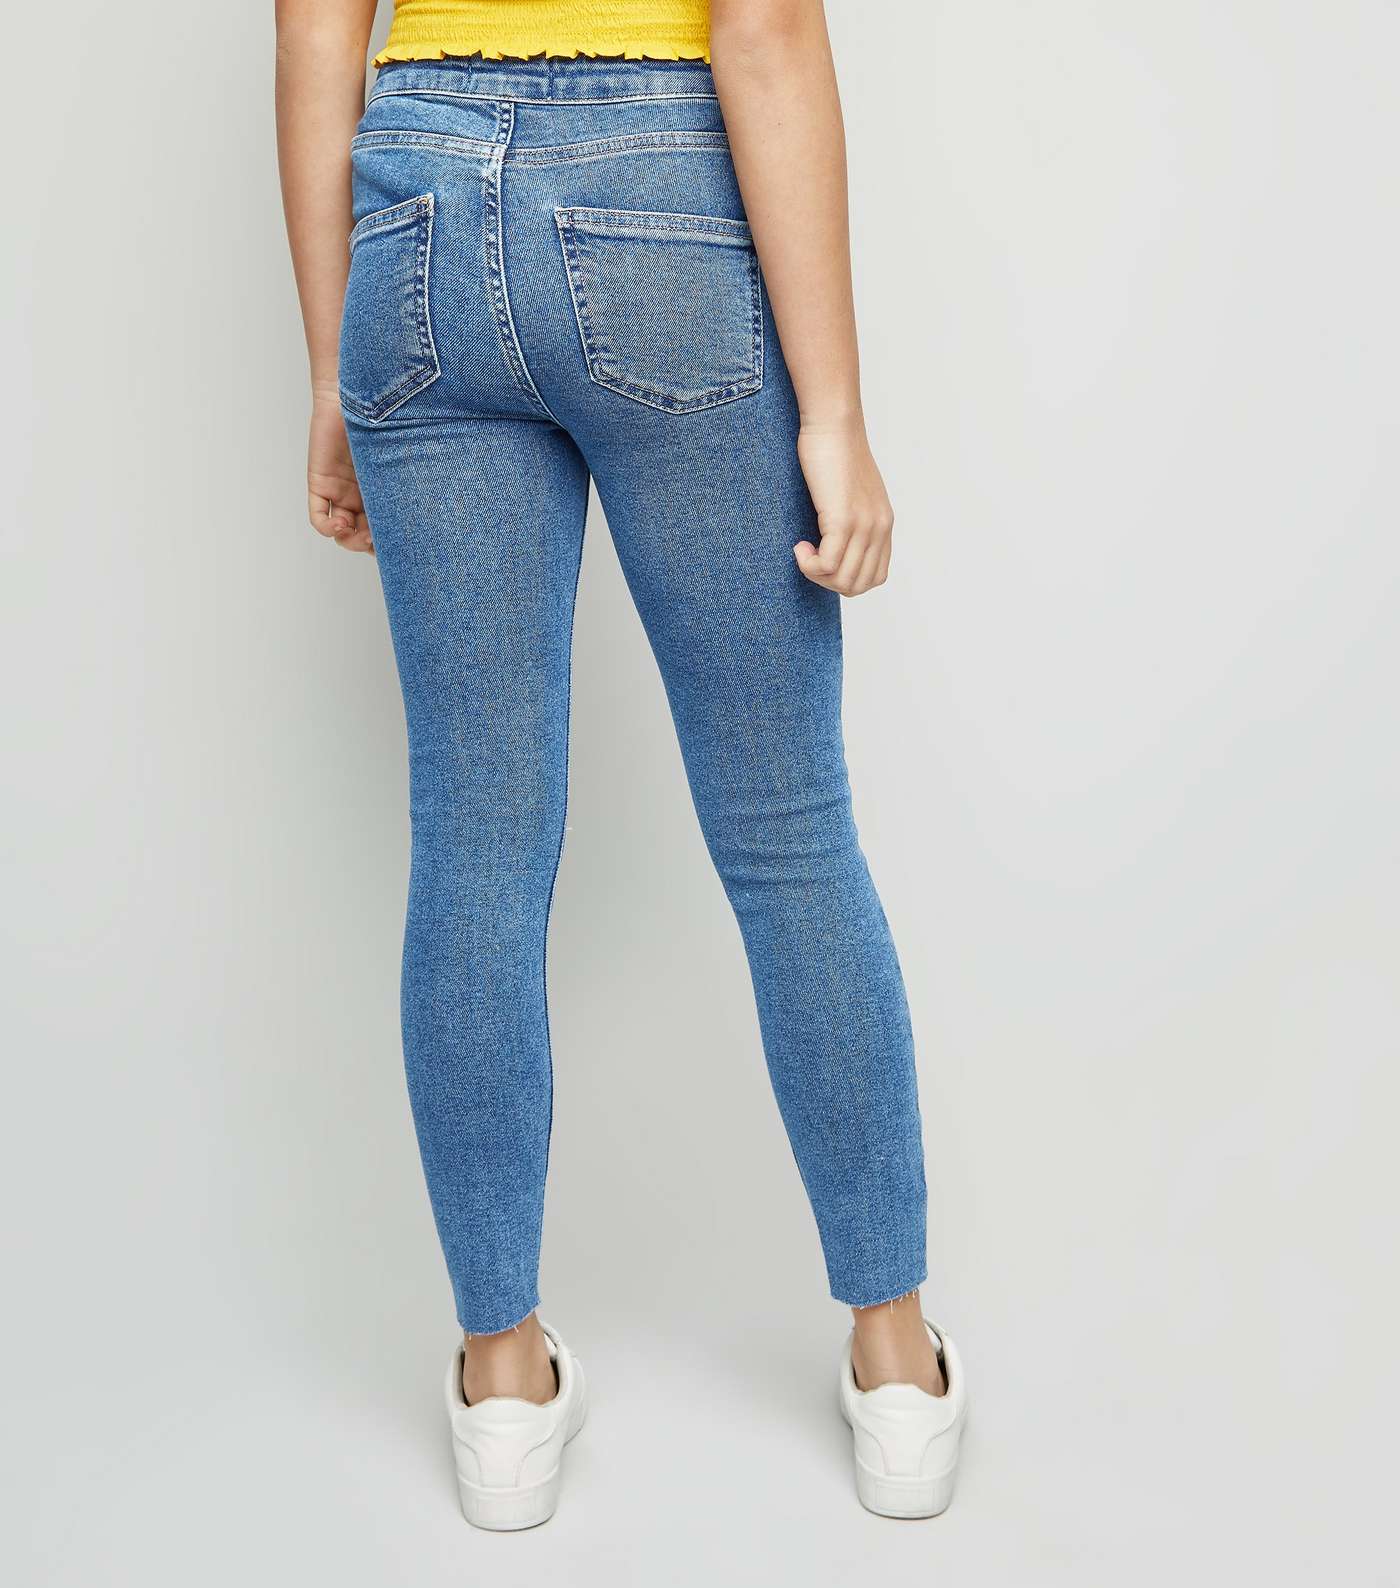 Girls Mid Blue Ripped High Waist Super Skinny Jeans Image 3